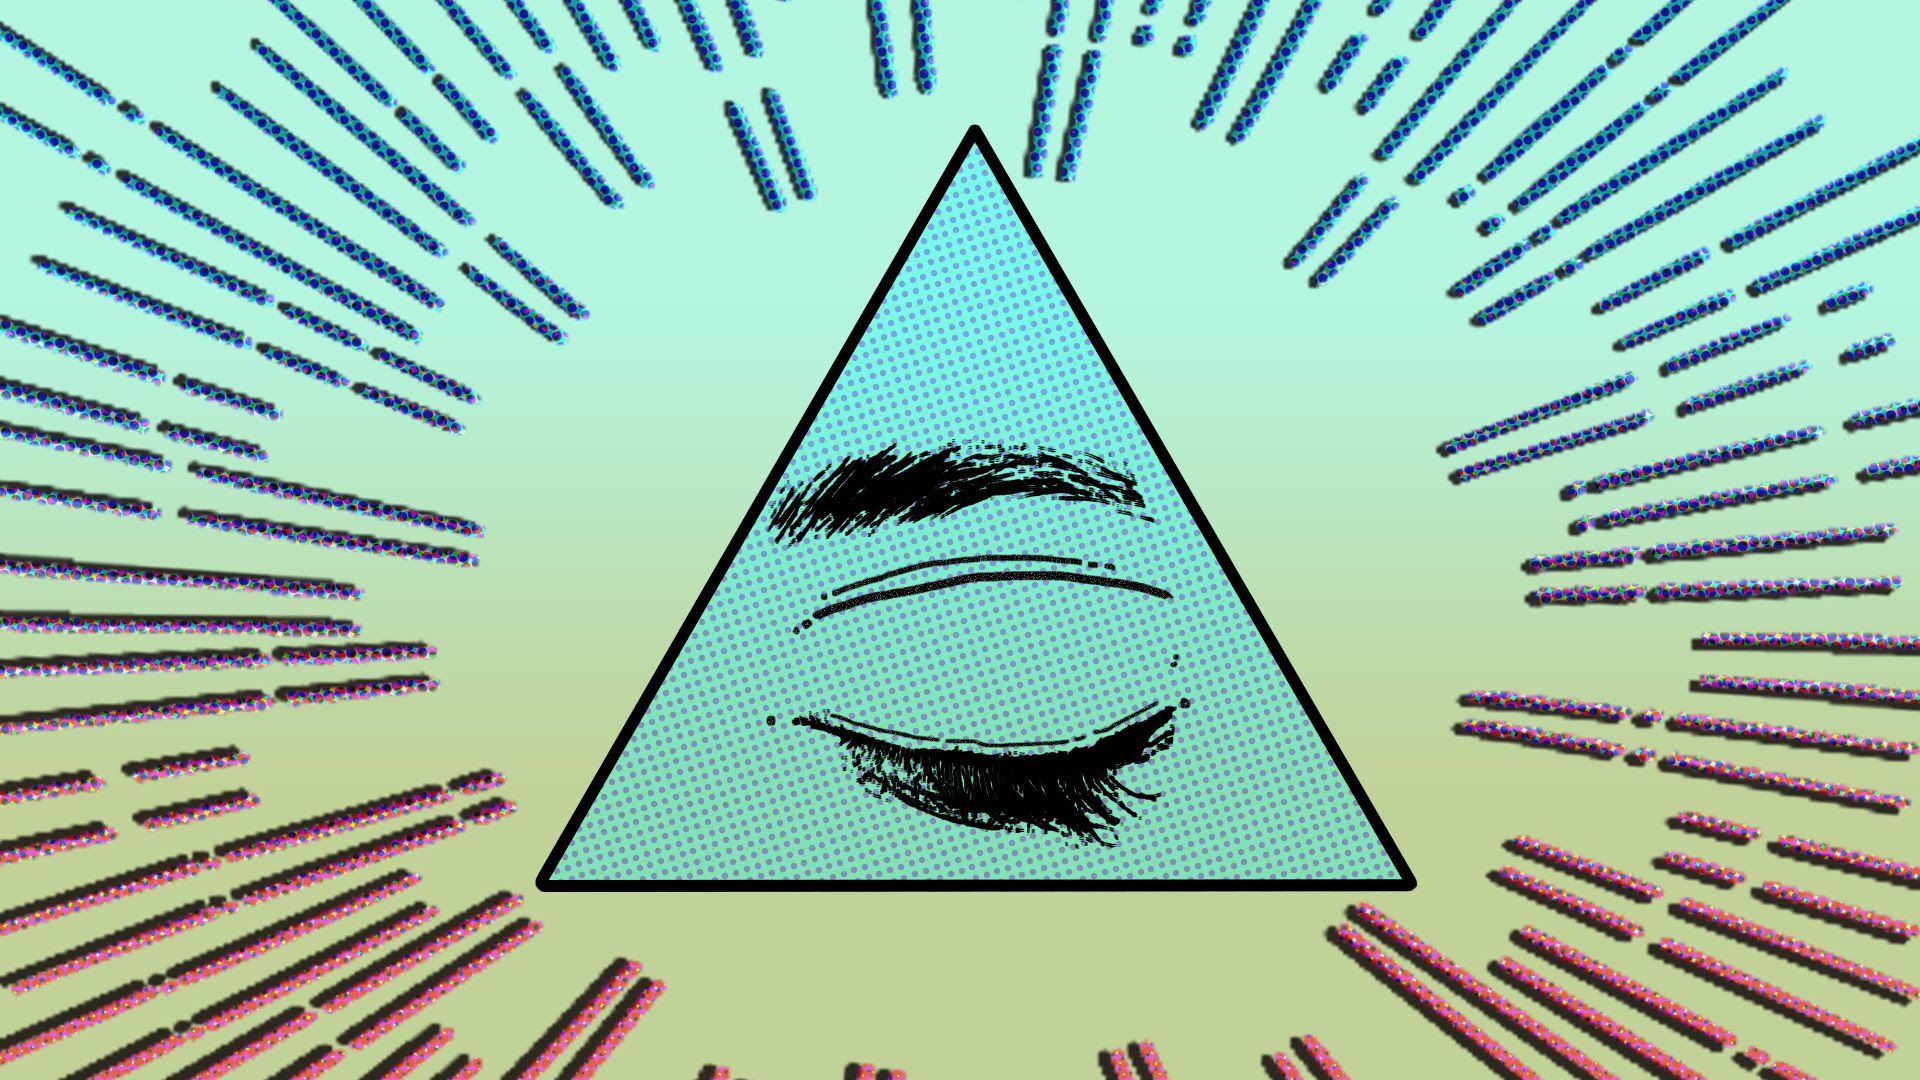 An illustration of an eye in a triangle